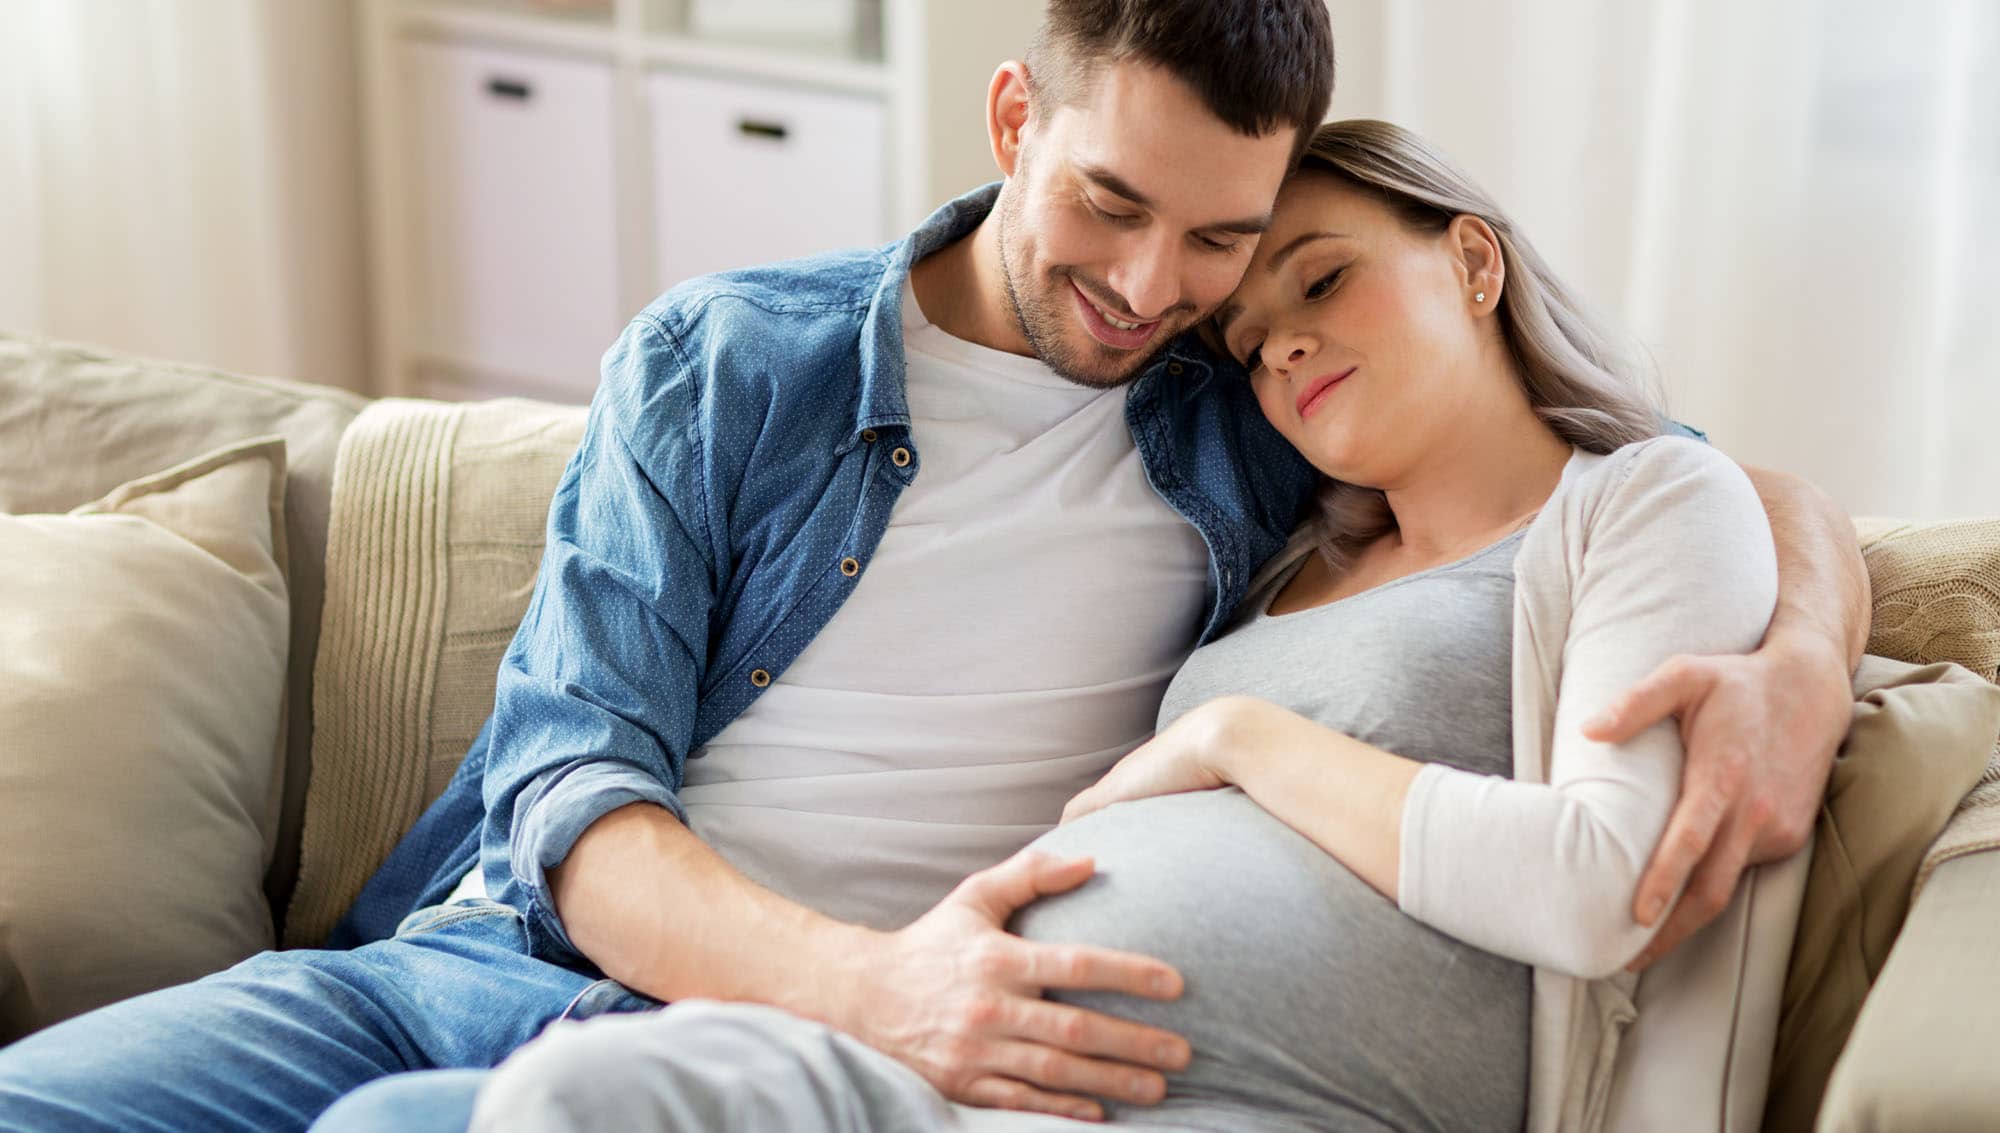 mom news daily - 5 Natural Ways to Manage During Pregnancy